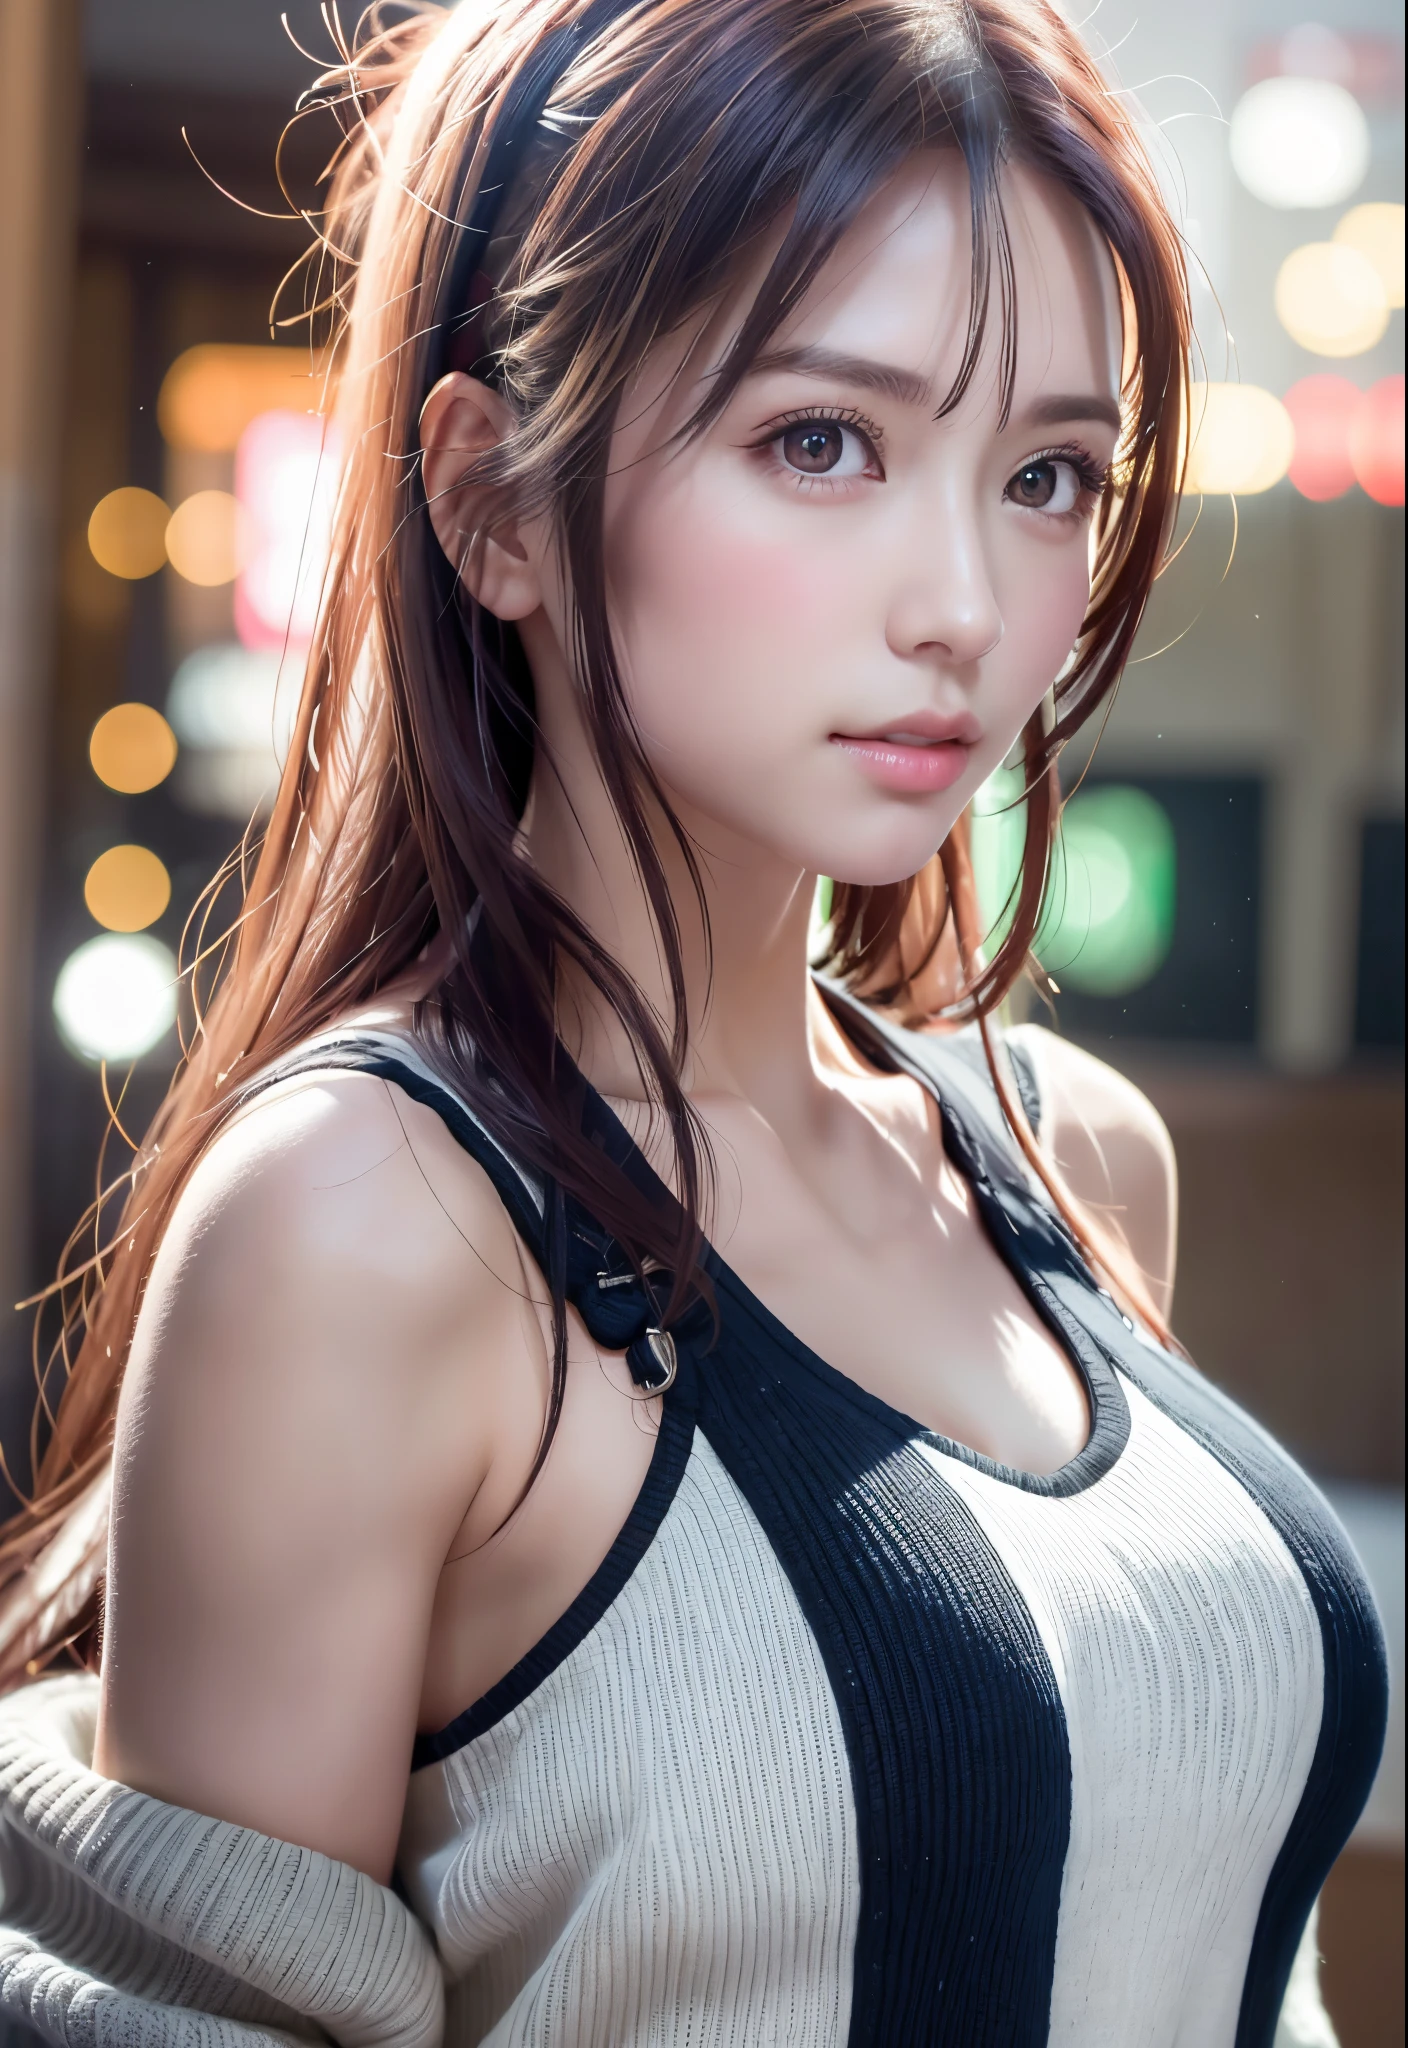 8K, of the highest quality, masutepiece:1.2), (Realistic, Photorealsitic:1.37), of the highest quality, masutepiece, Beautiful young woman, Pensive expression,、A charming、and an inviting look, Dobo dabo knitwear、cleavage of the breast, Hair tied back, Cinematic background, Light skin tone